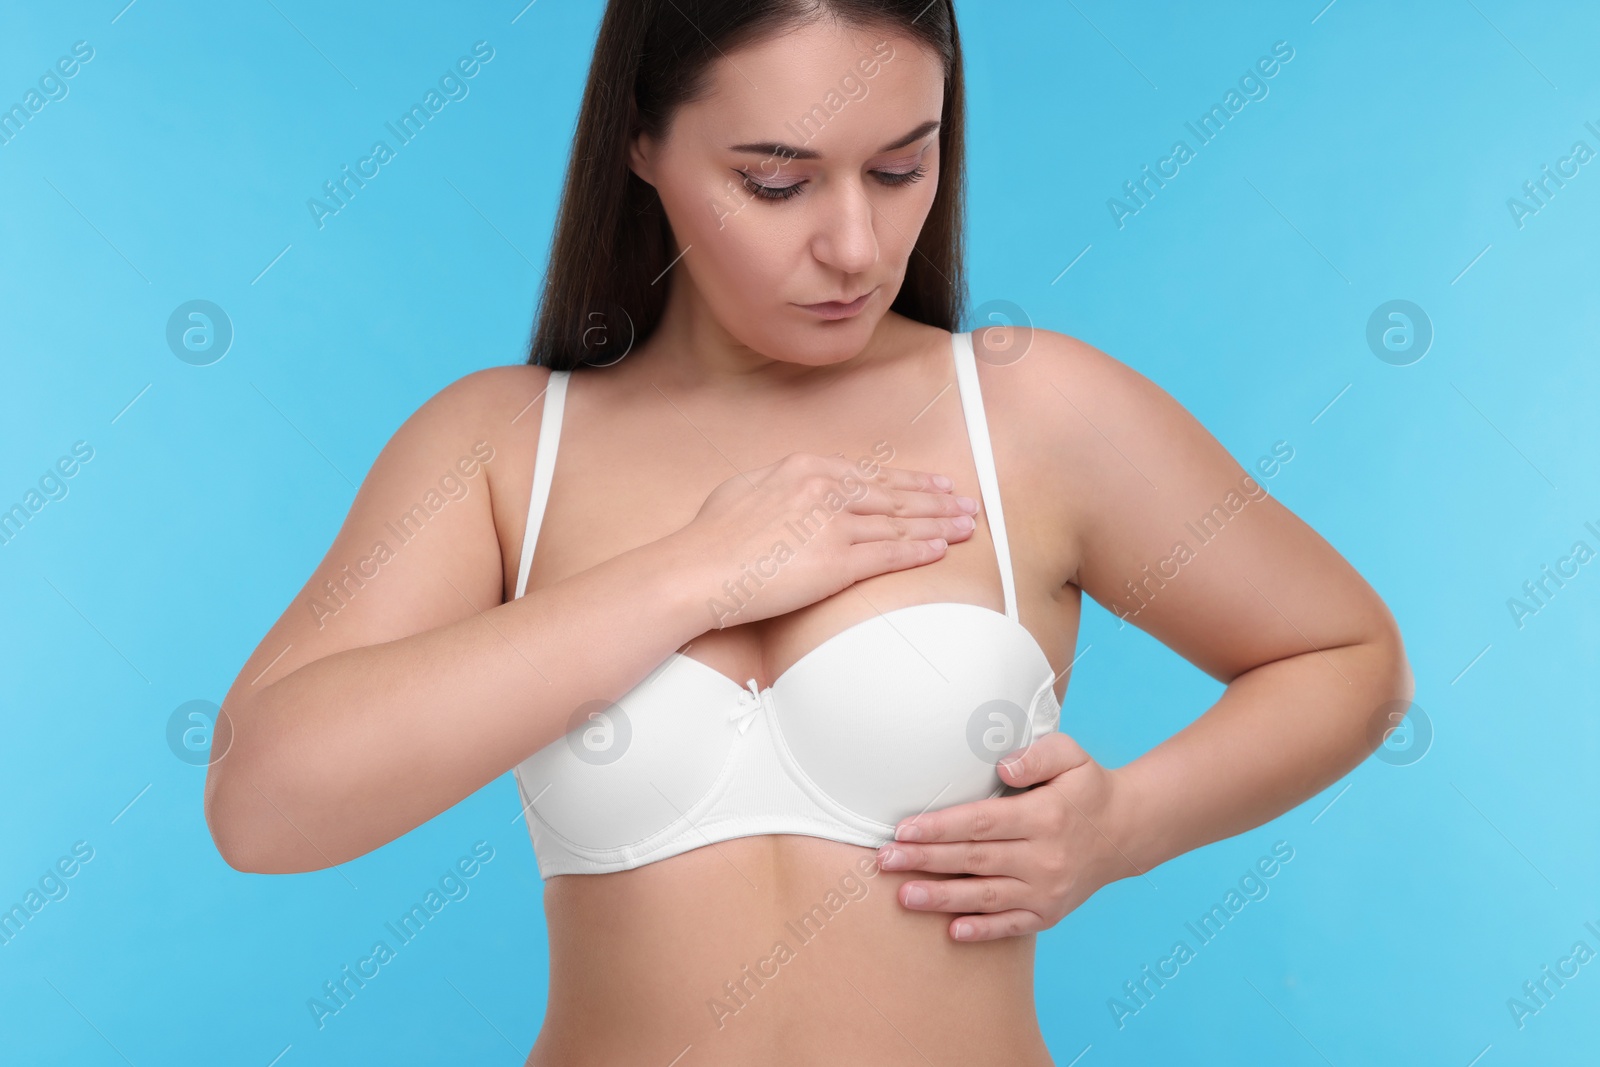 Photo of Mammology. Woman in bra doing breast self-examination on light blue background